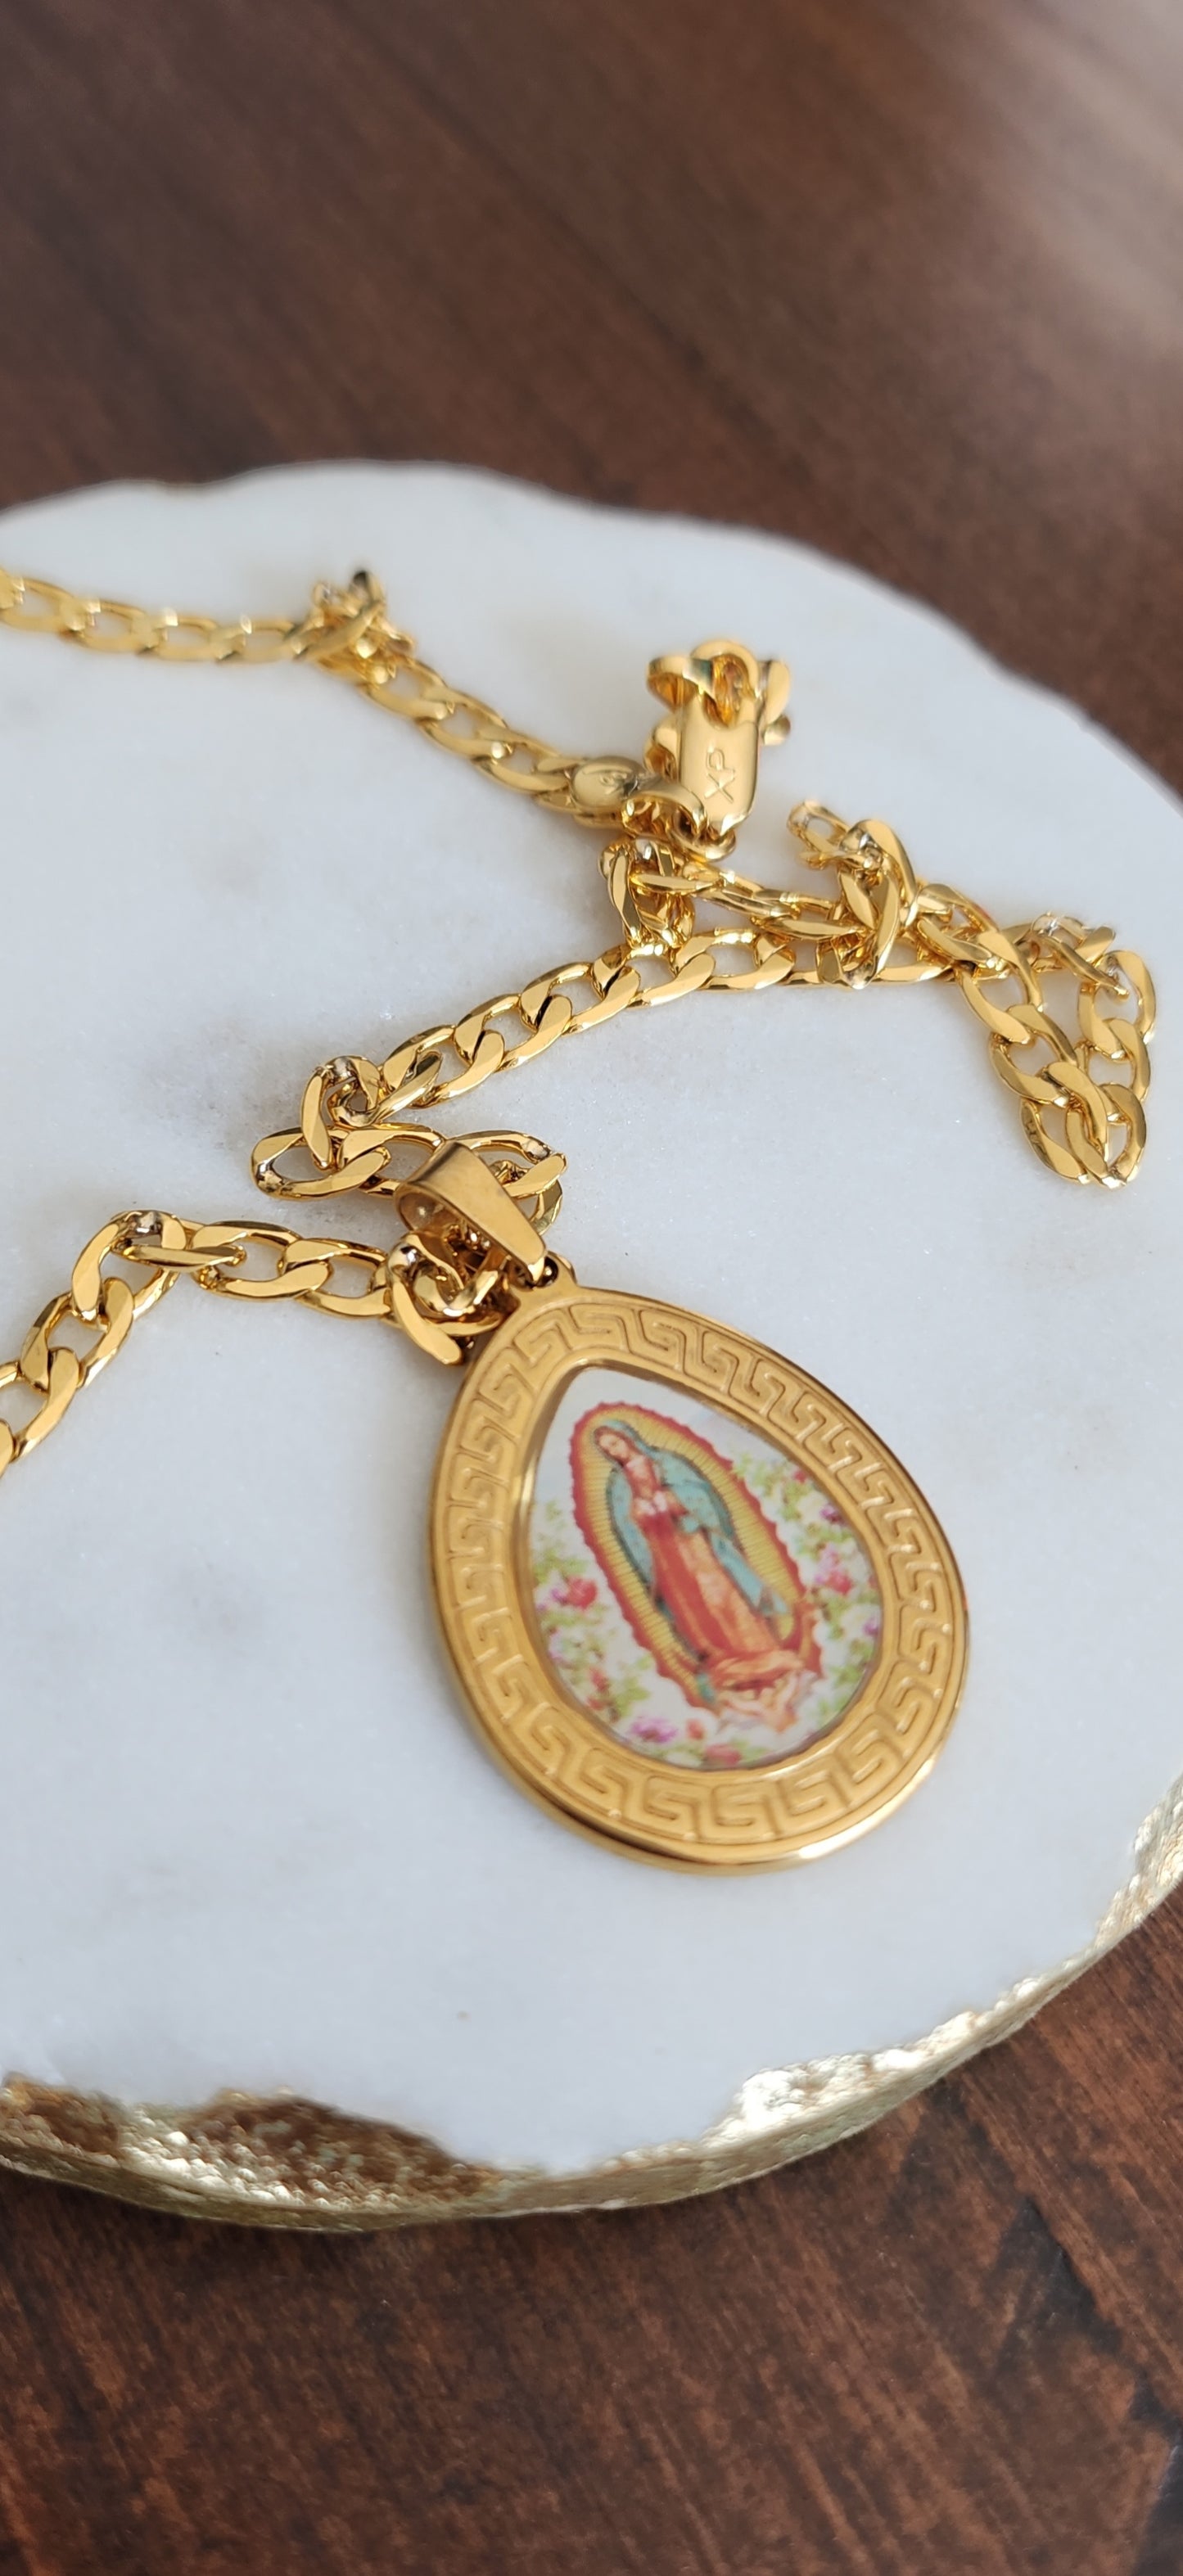 Virgin Mary pendant and chain